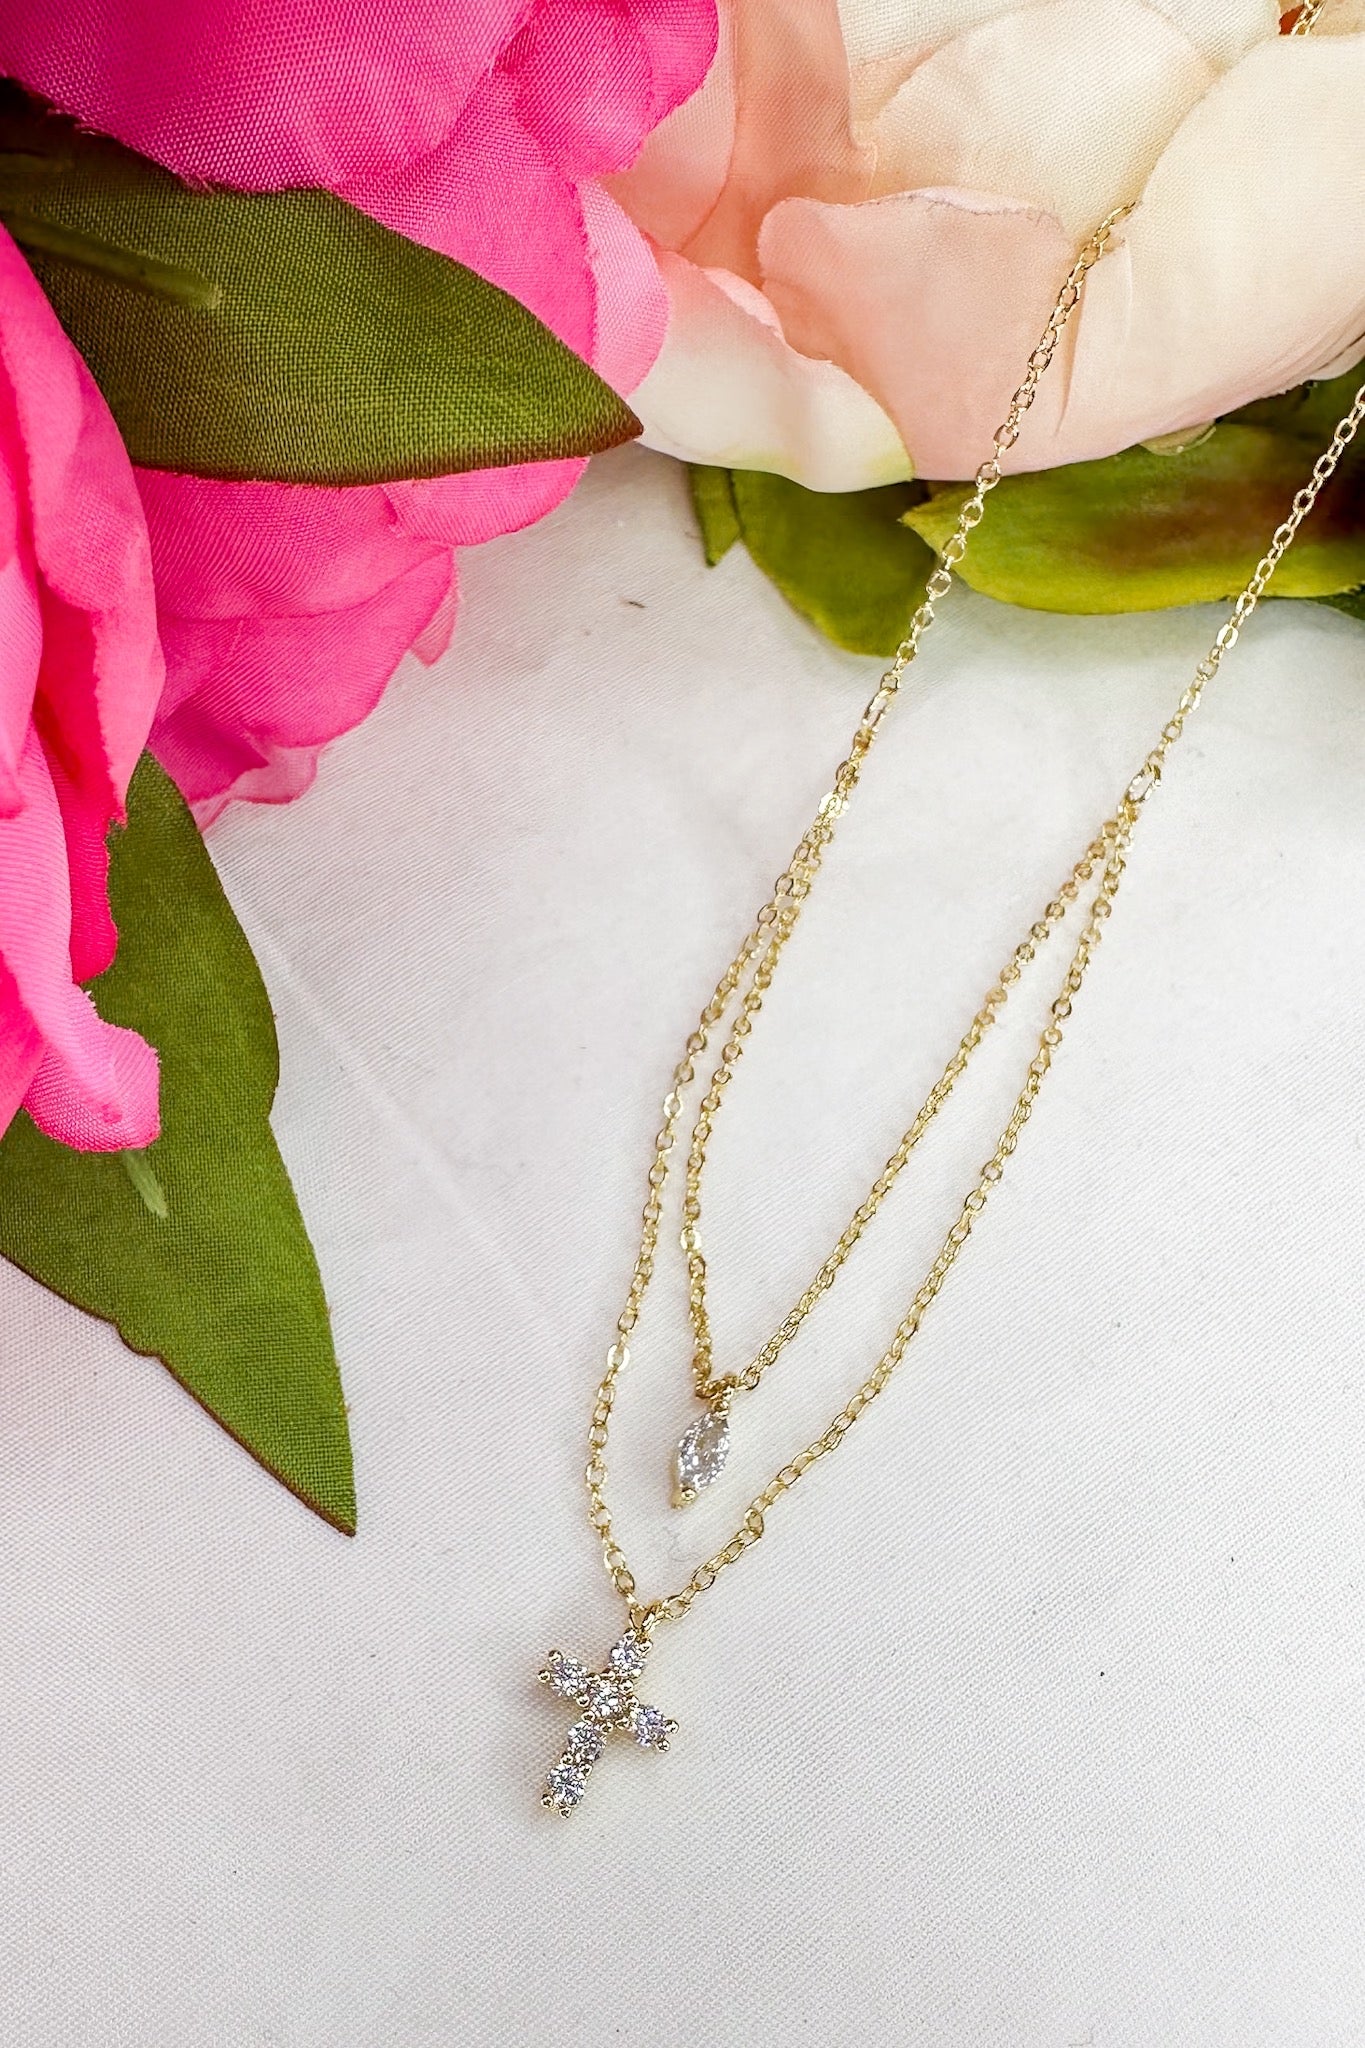 Petite Serenity Layered Necklace by Treasure Jewels